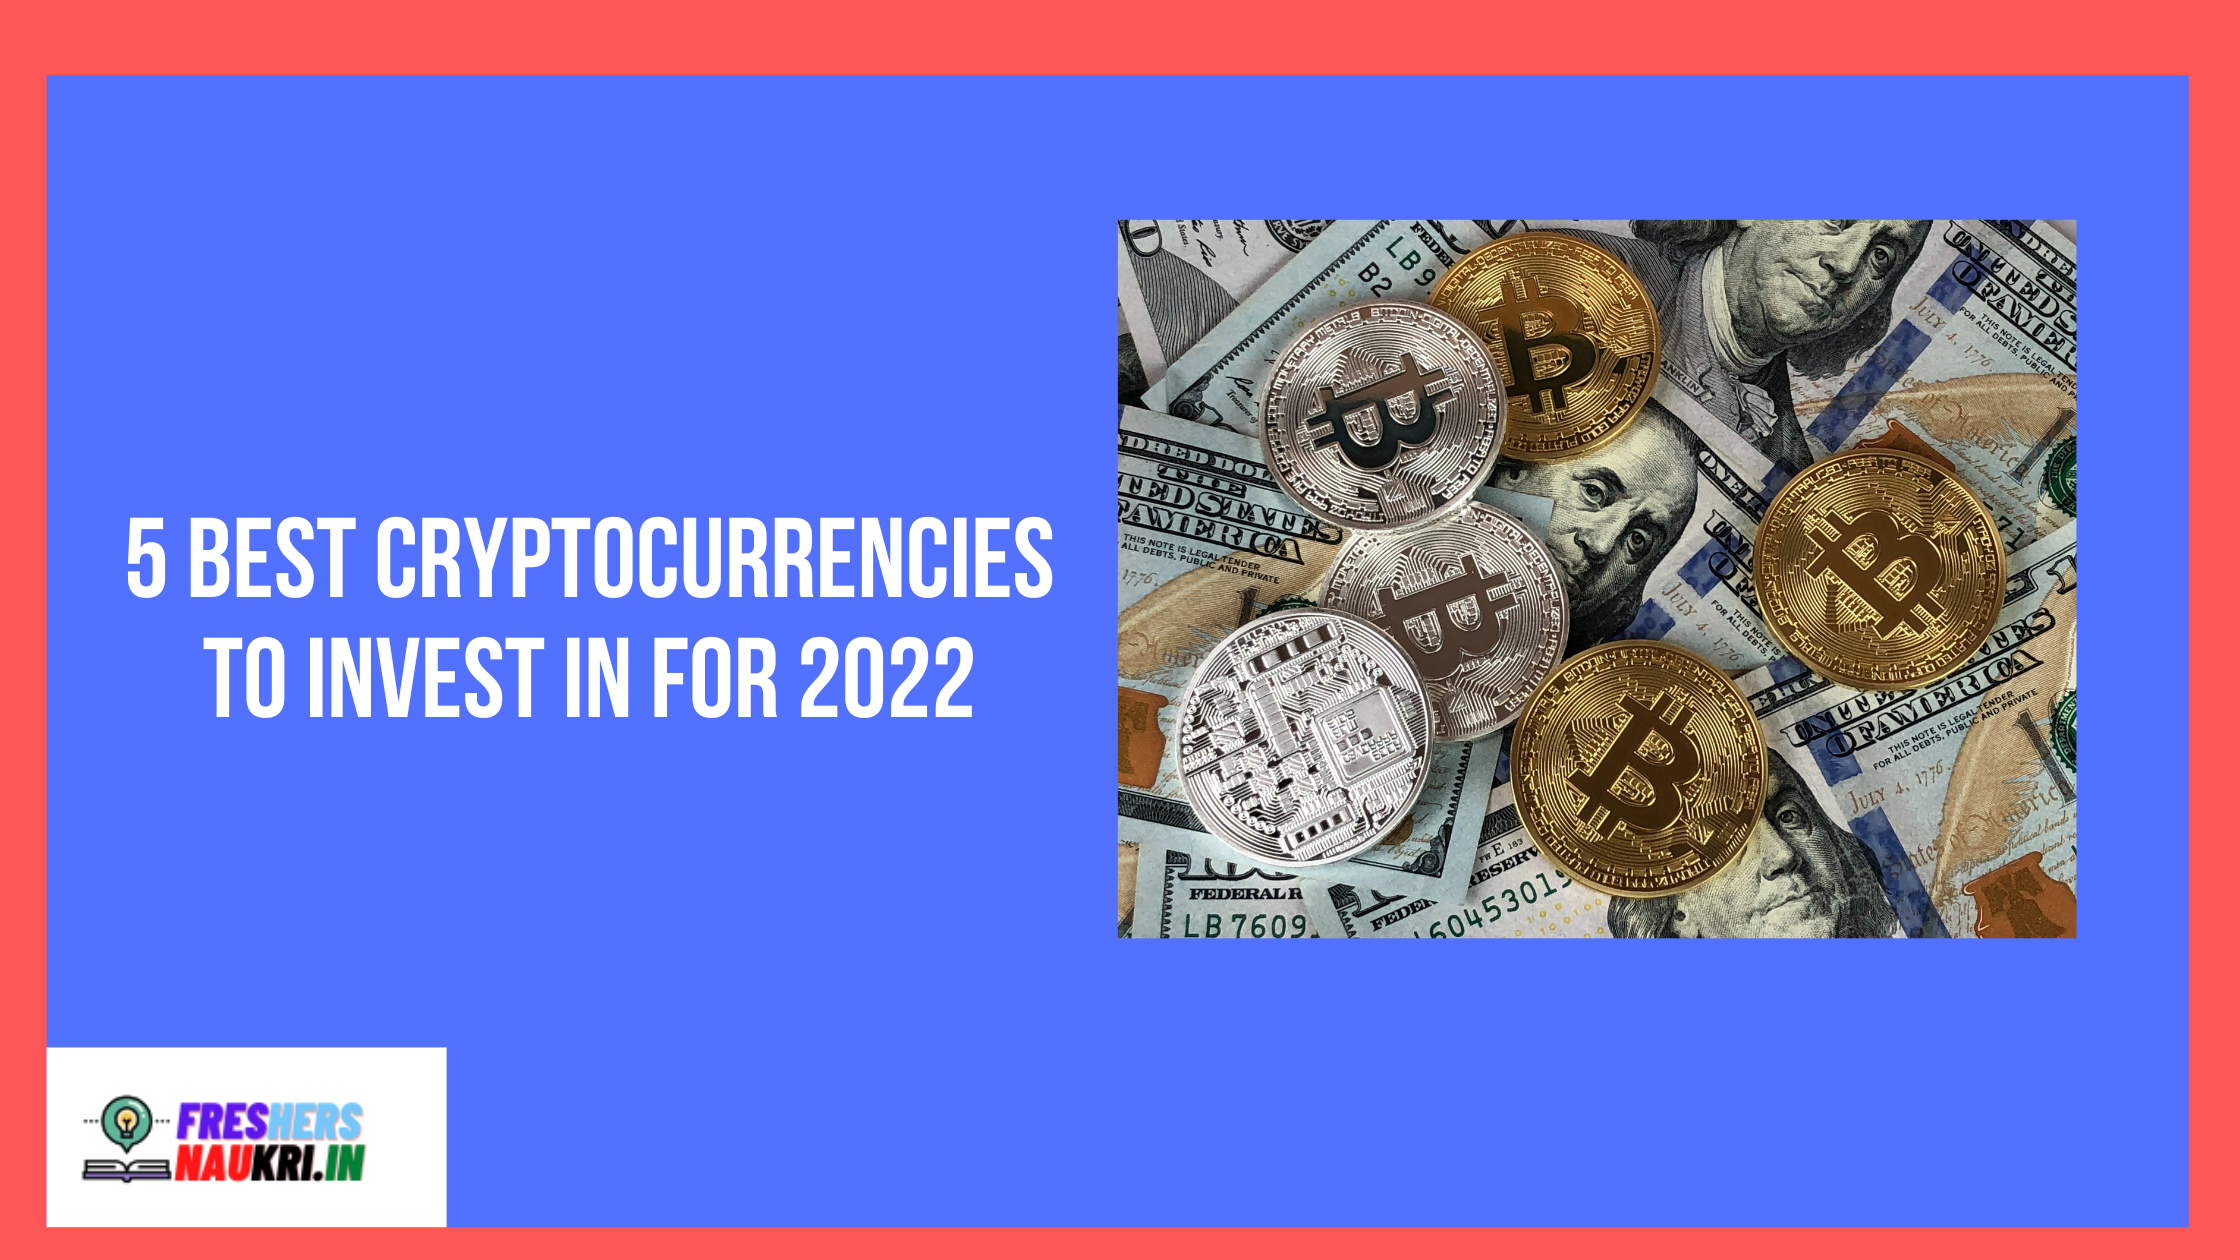 5 Best Cryptocurrencies To Invest In for 2022: